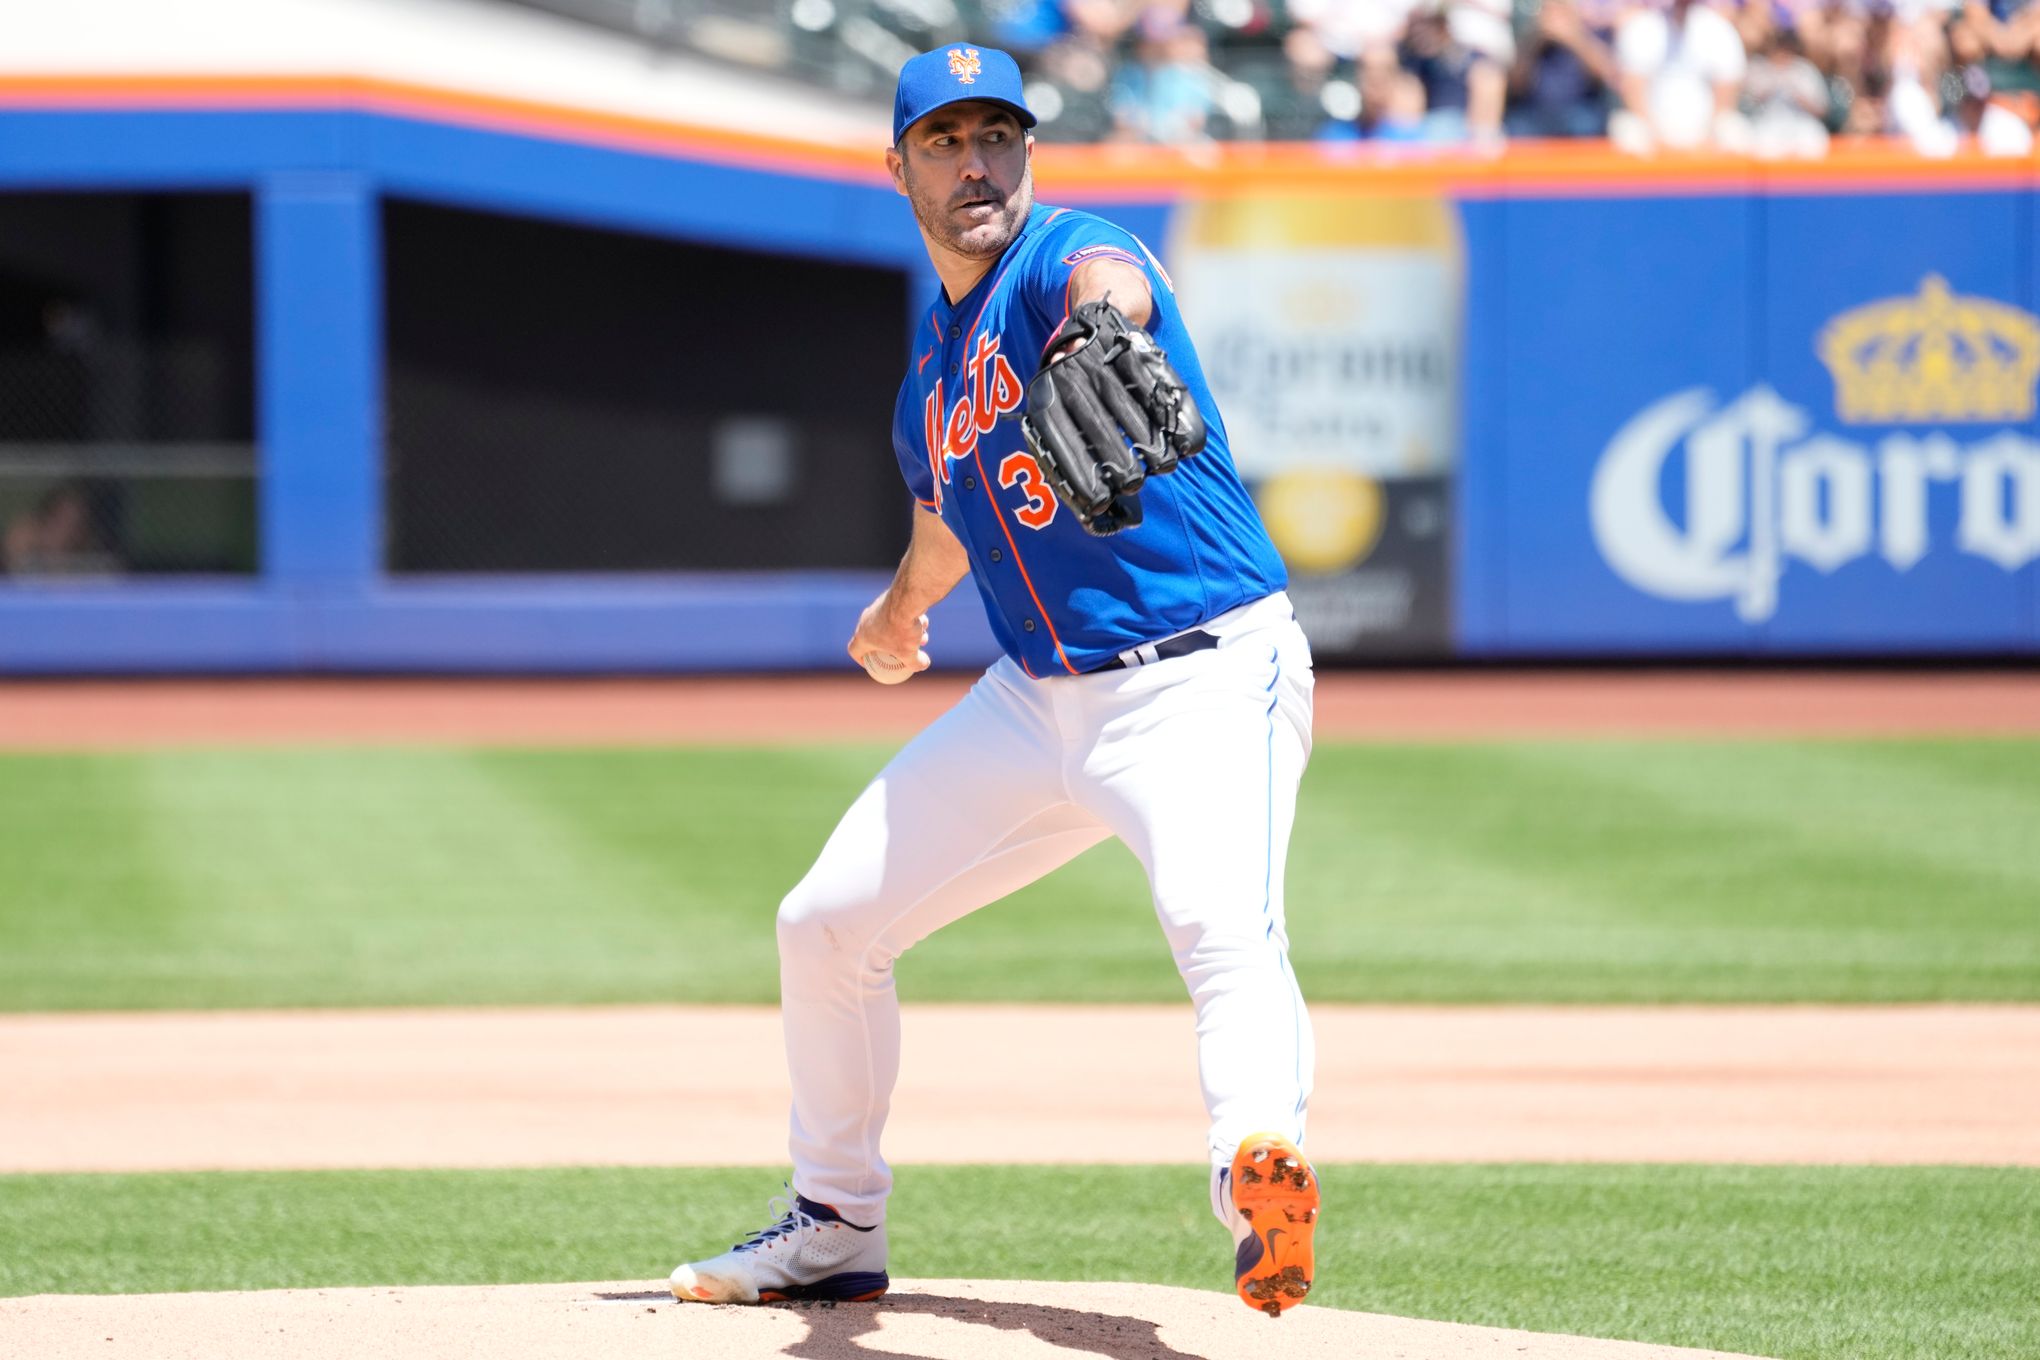 Player Profiles 2020: New York Mets Starting Pitchers